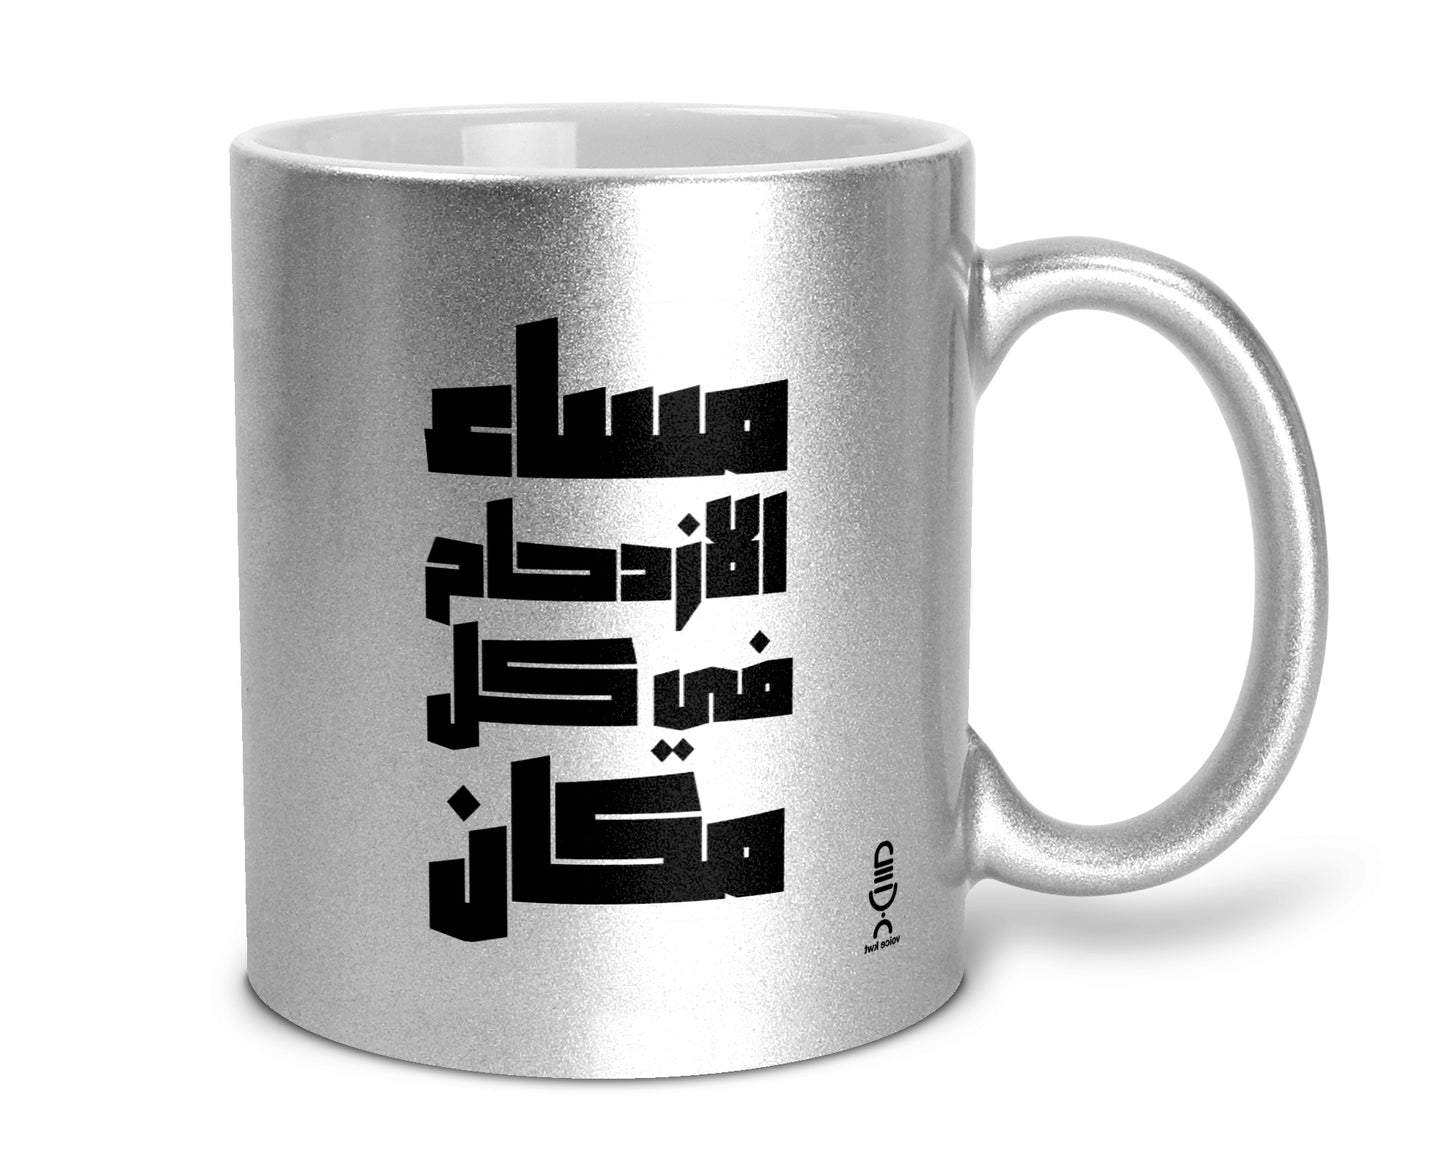 Mugs with Voice famous quote "Good rush-hour morning everywhere"